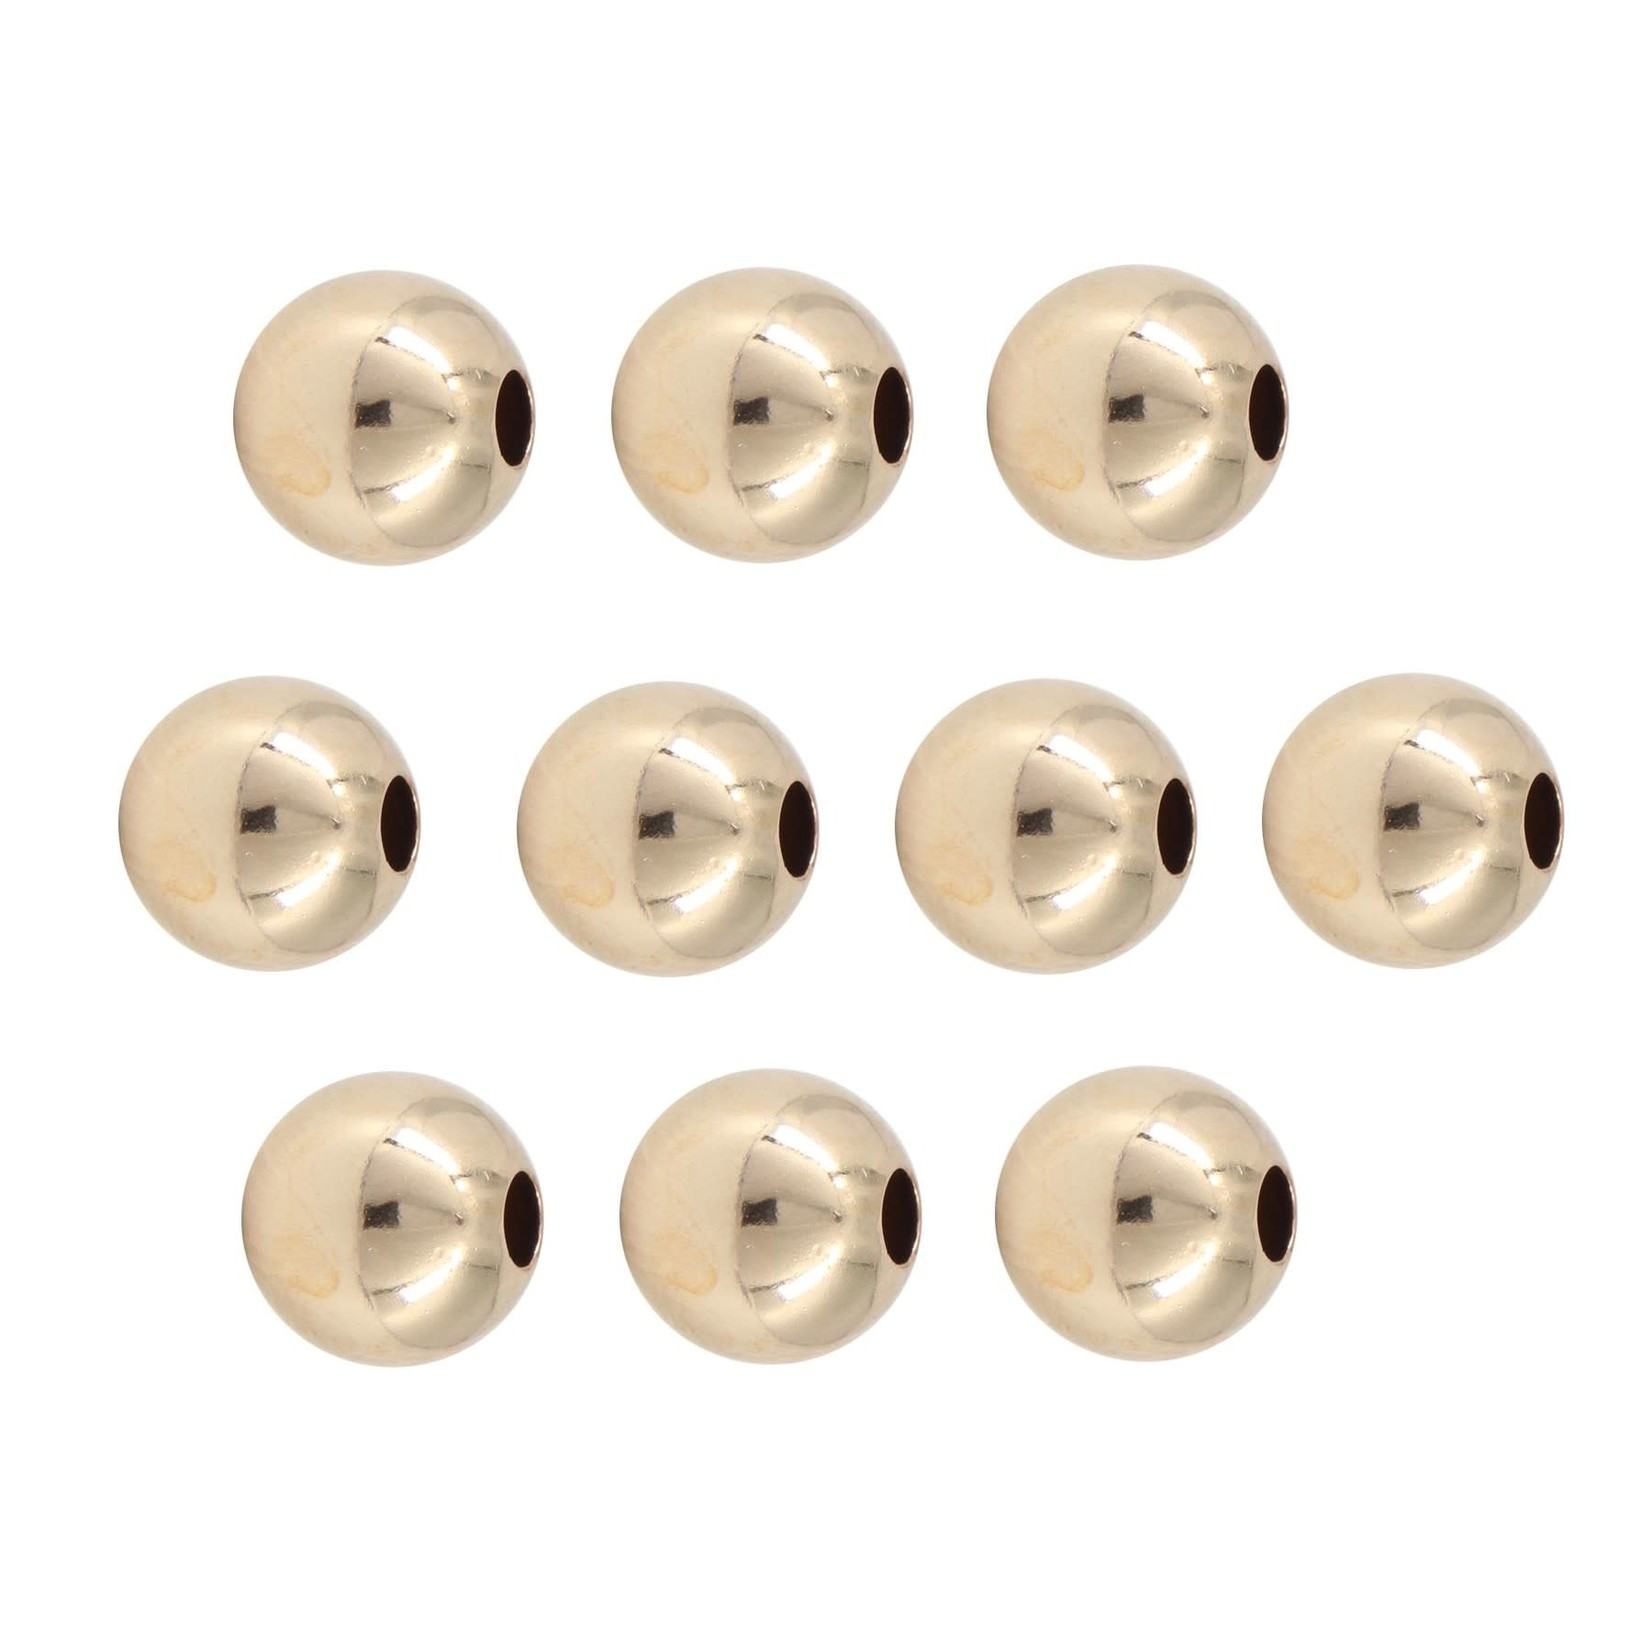 Gold Filled Smooth 5mm Round Bead w/ 1.5mm Hole - 10 Pieces